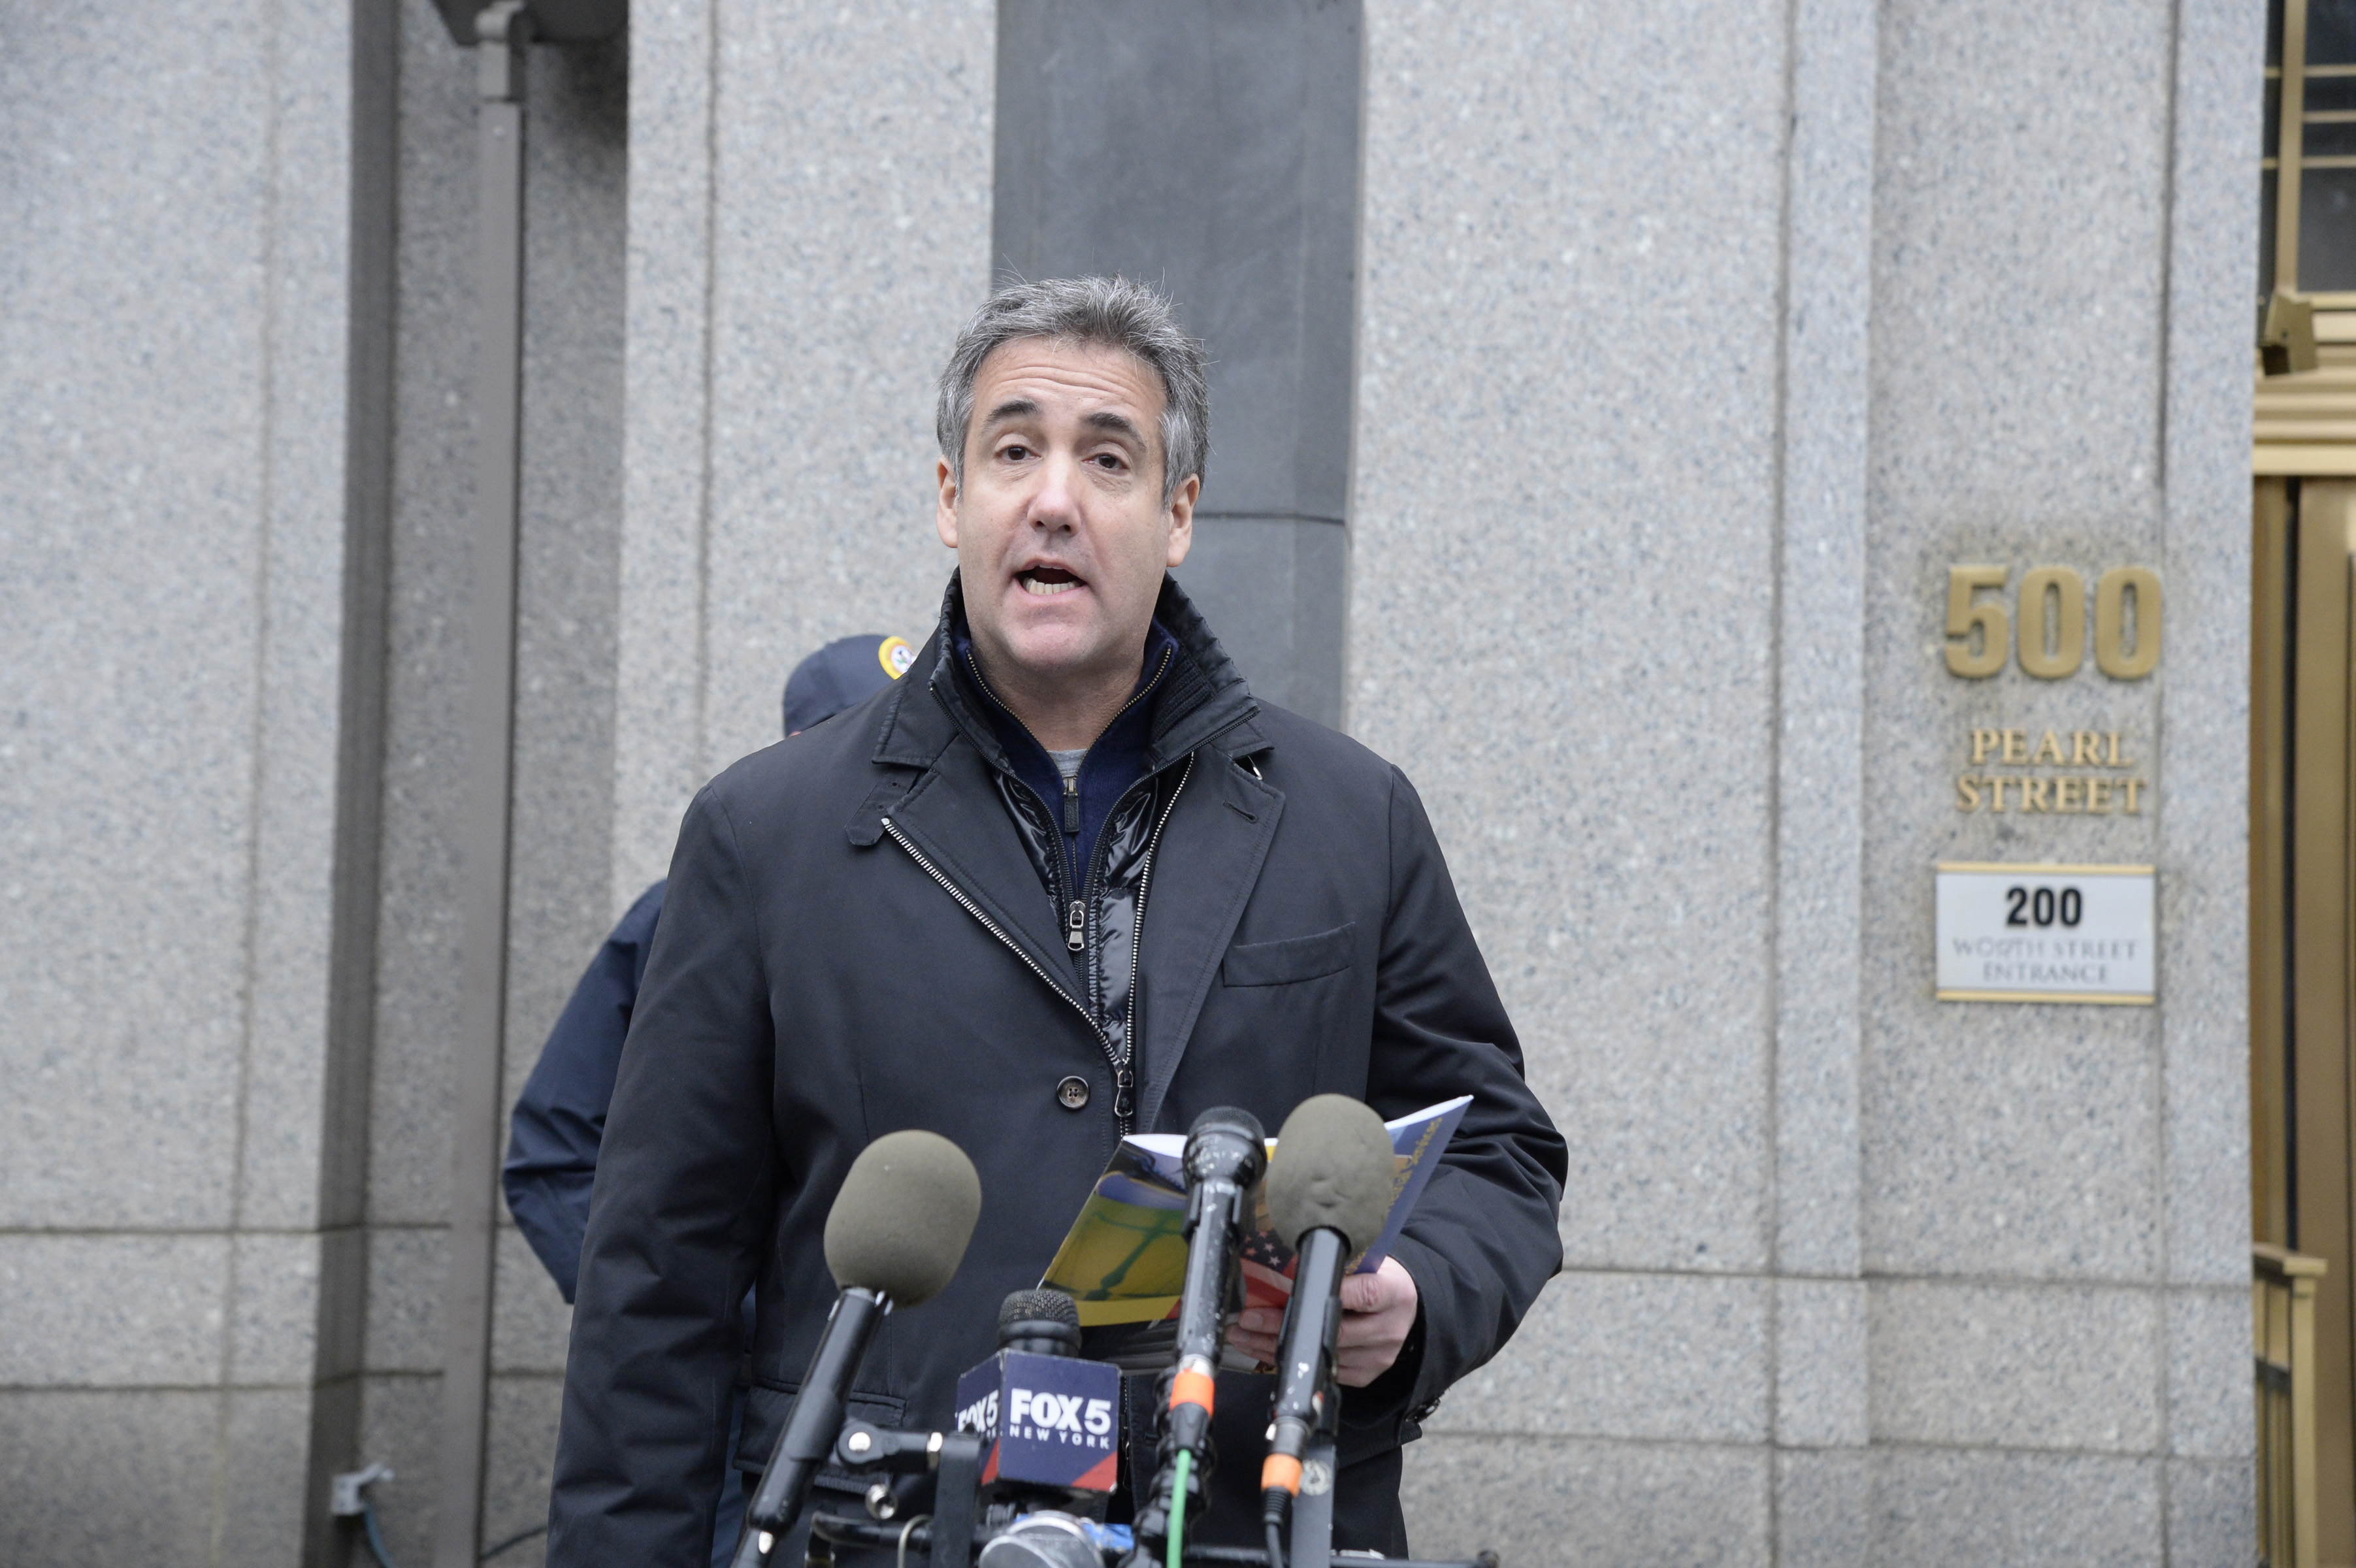 Michael Cohen, former personal lawyer to U.S. President Donald Trump, speaks during a news conference outside federal court in New York, U.S., on Monday, Nov. 22, 2021.(Jefferson Siegel/Bloomberg via Getty Images)